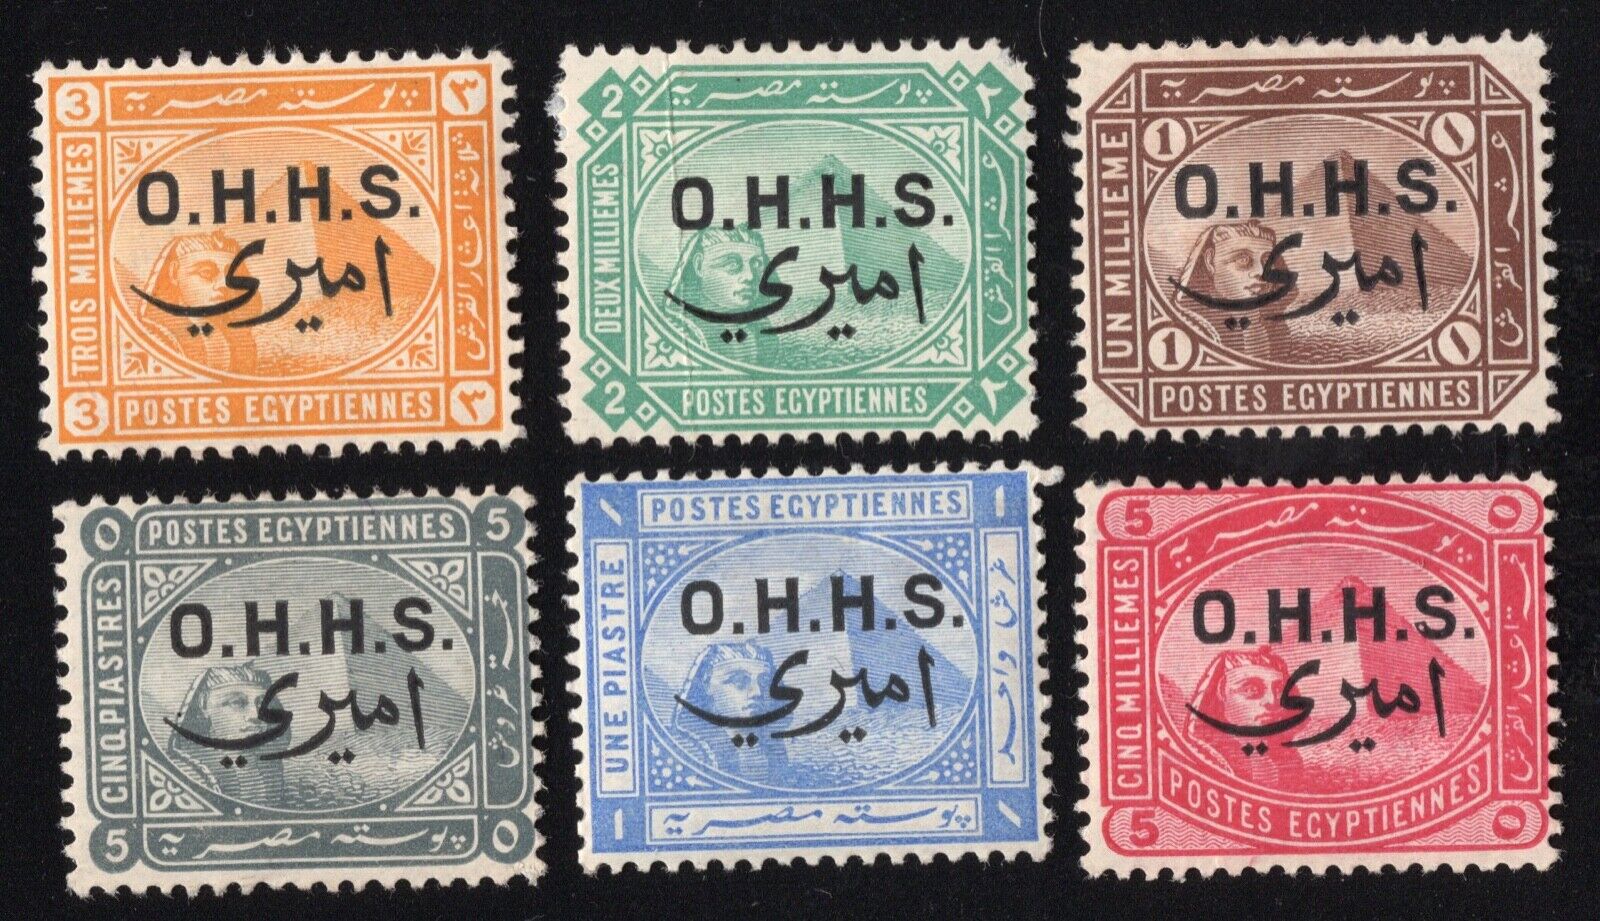 Egypt 1907 set NEW before selling of Quantity limited 6 stamps CV71.40$ MH Gib#073-078